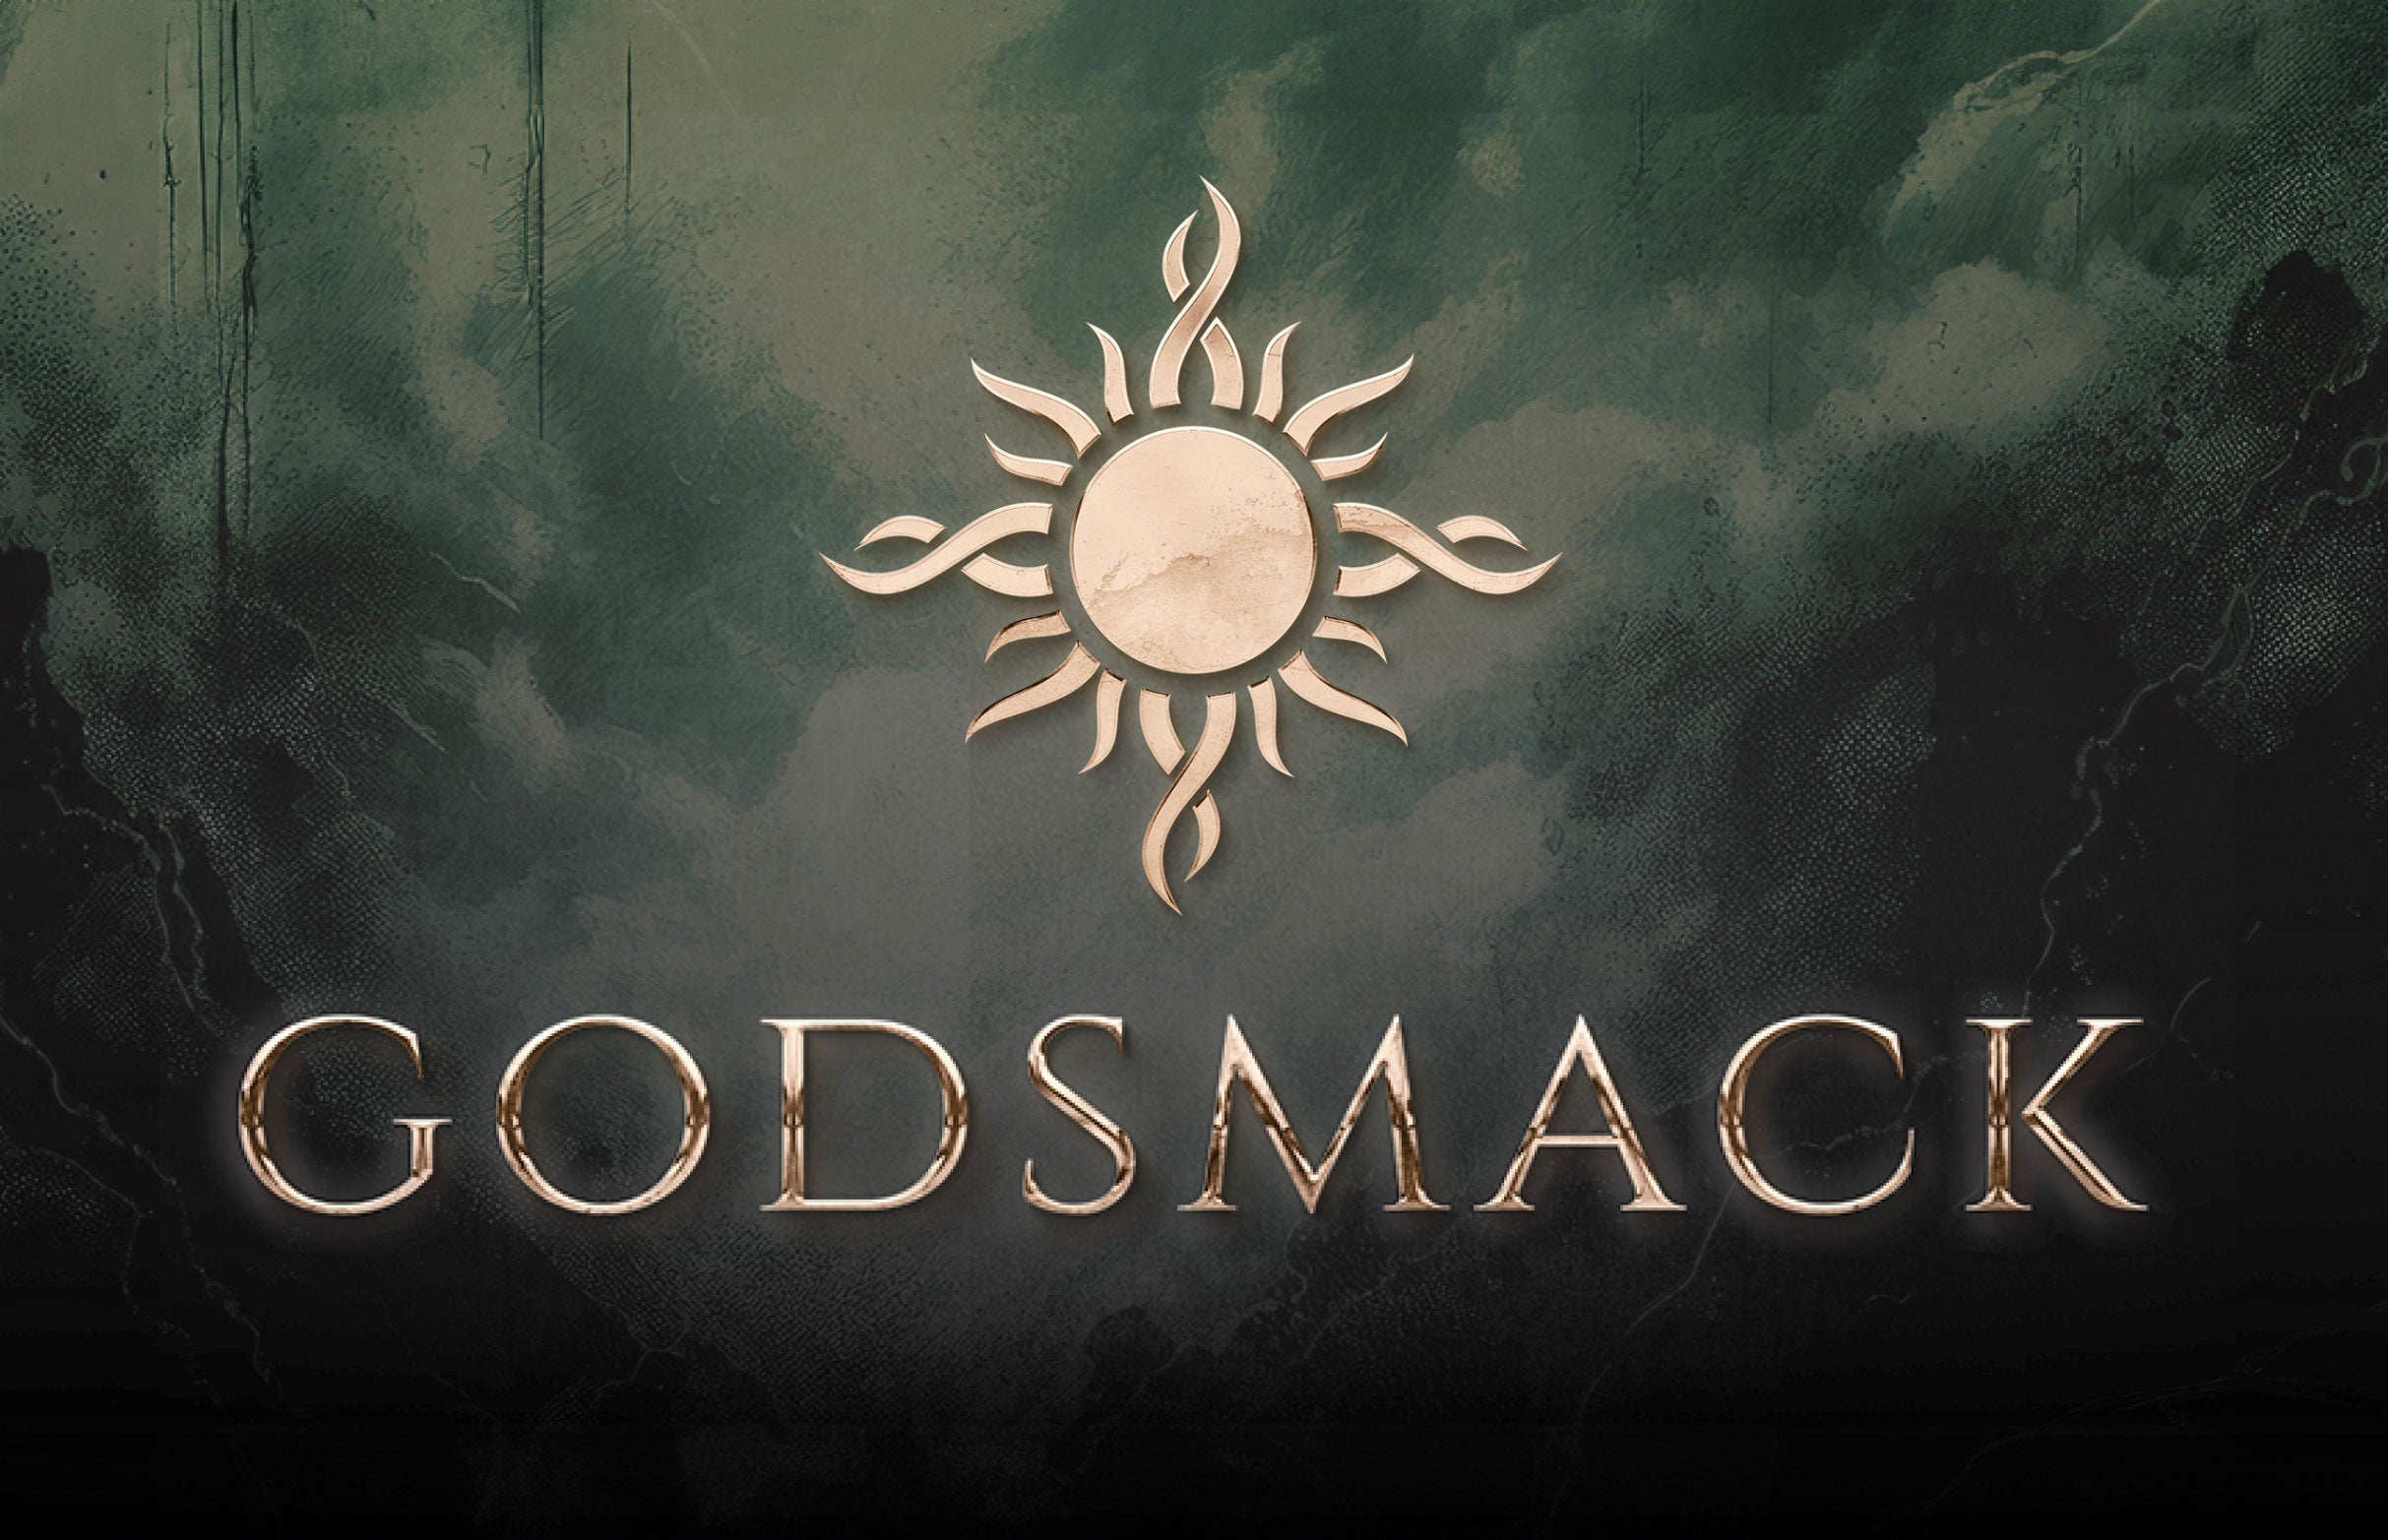 Godsmack pre-sale code for event tickets in Bangor, ME (Maine Savings Amphitheater)